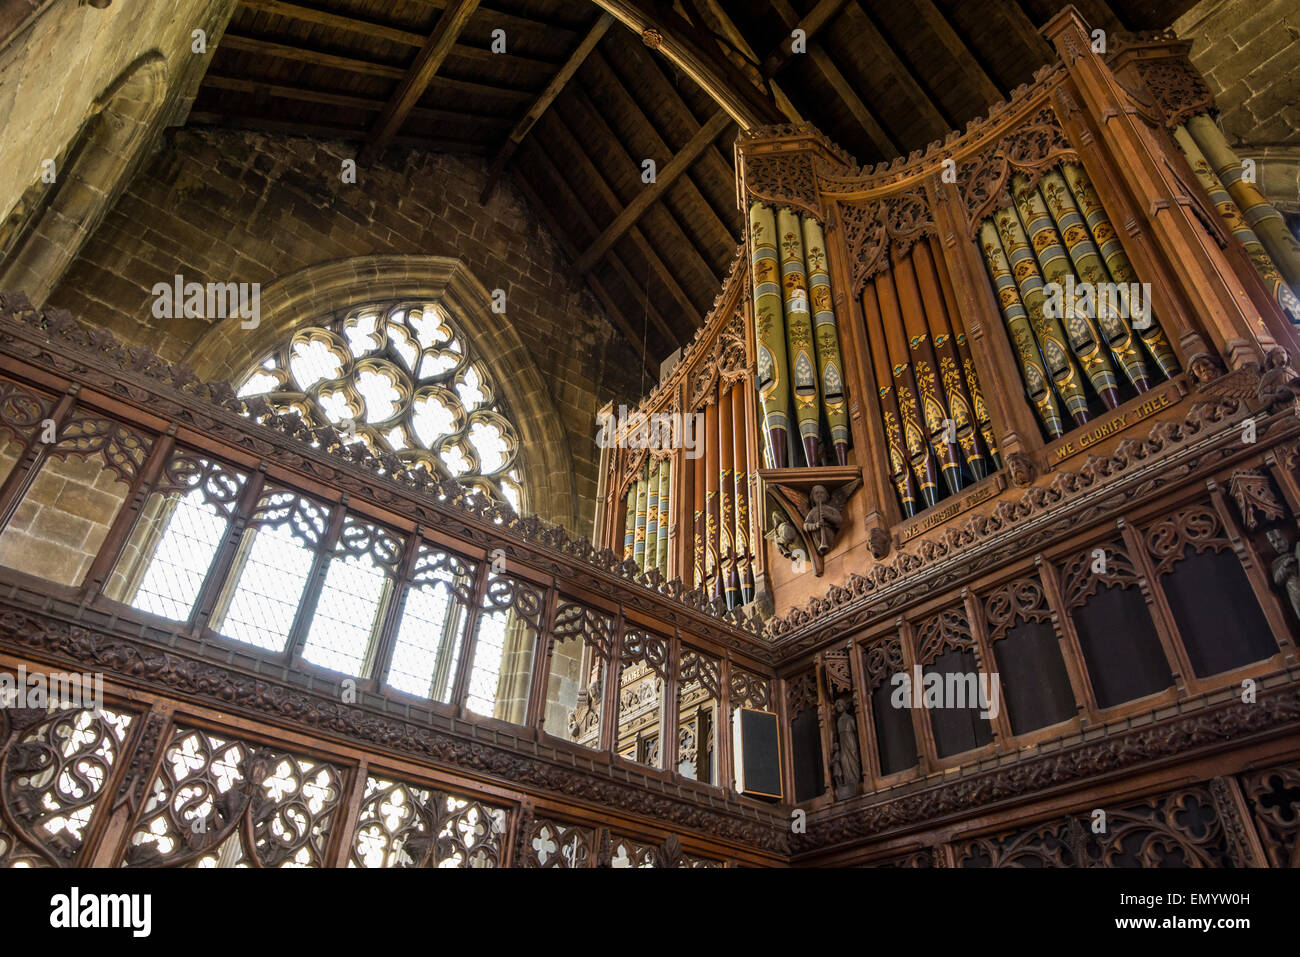 Church organ in the 'Cathedral of the Peak', Tideswell, Derbyshire. Stock Photo